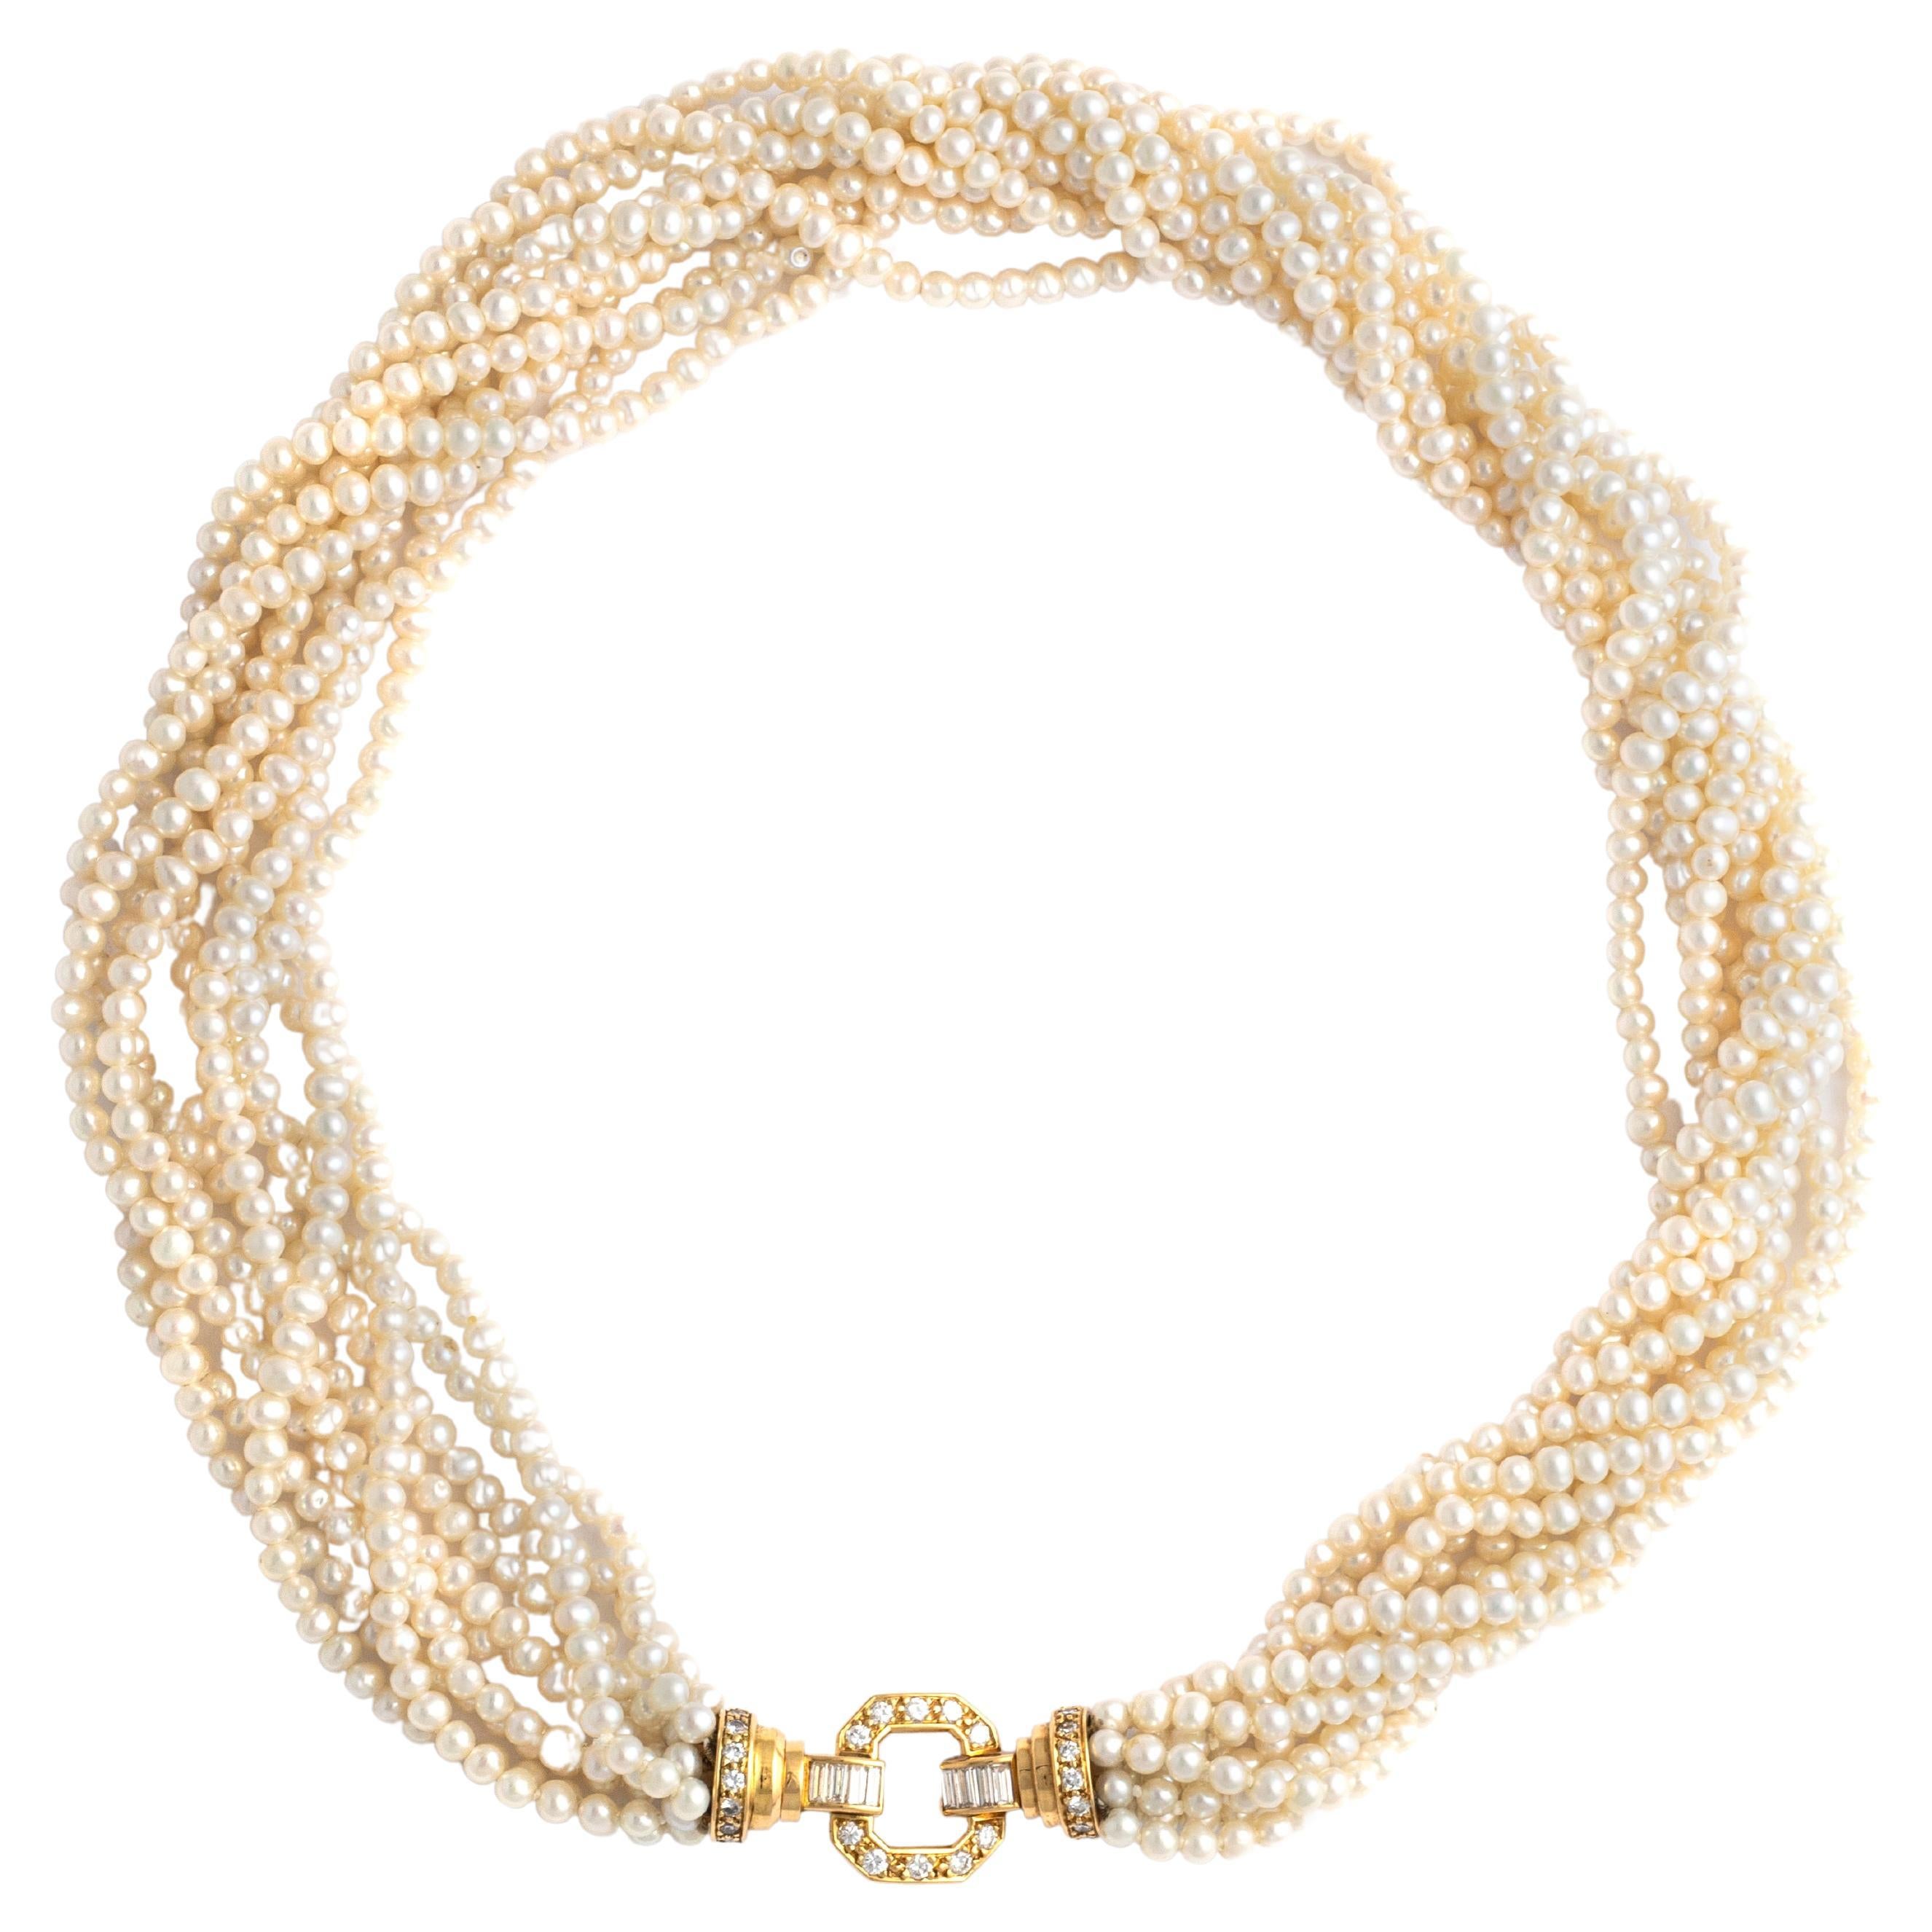 Cultured Pearl Necklace with 10 strands of pearls holding a 18K yellow gold clasp set by 28 round cut diamond and 8 baguette cut diamonds.

The strands of lustrous pearls create a luxurious and voluminous cascade, framing the neckline with timeless